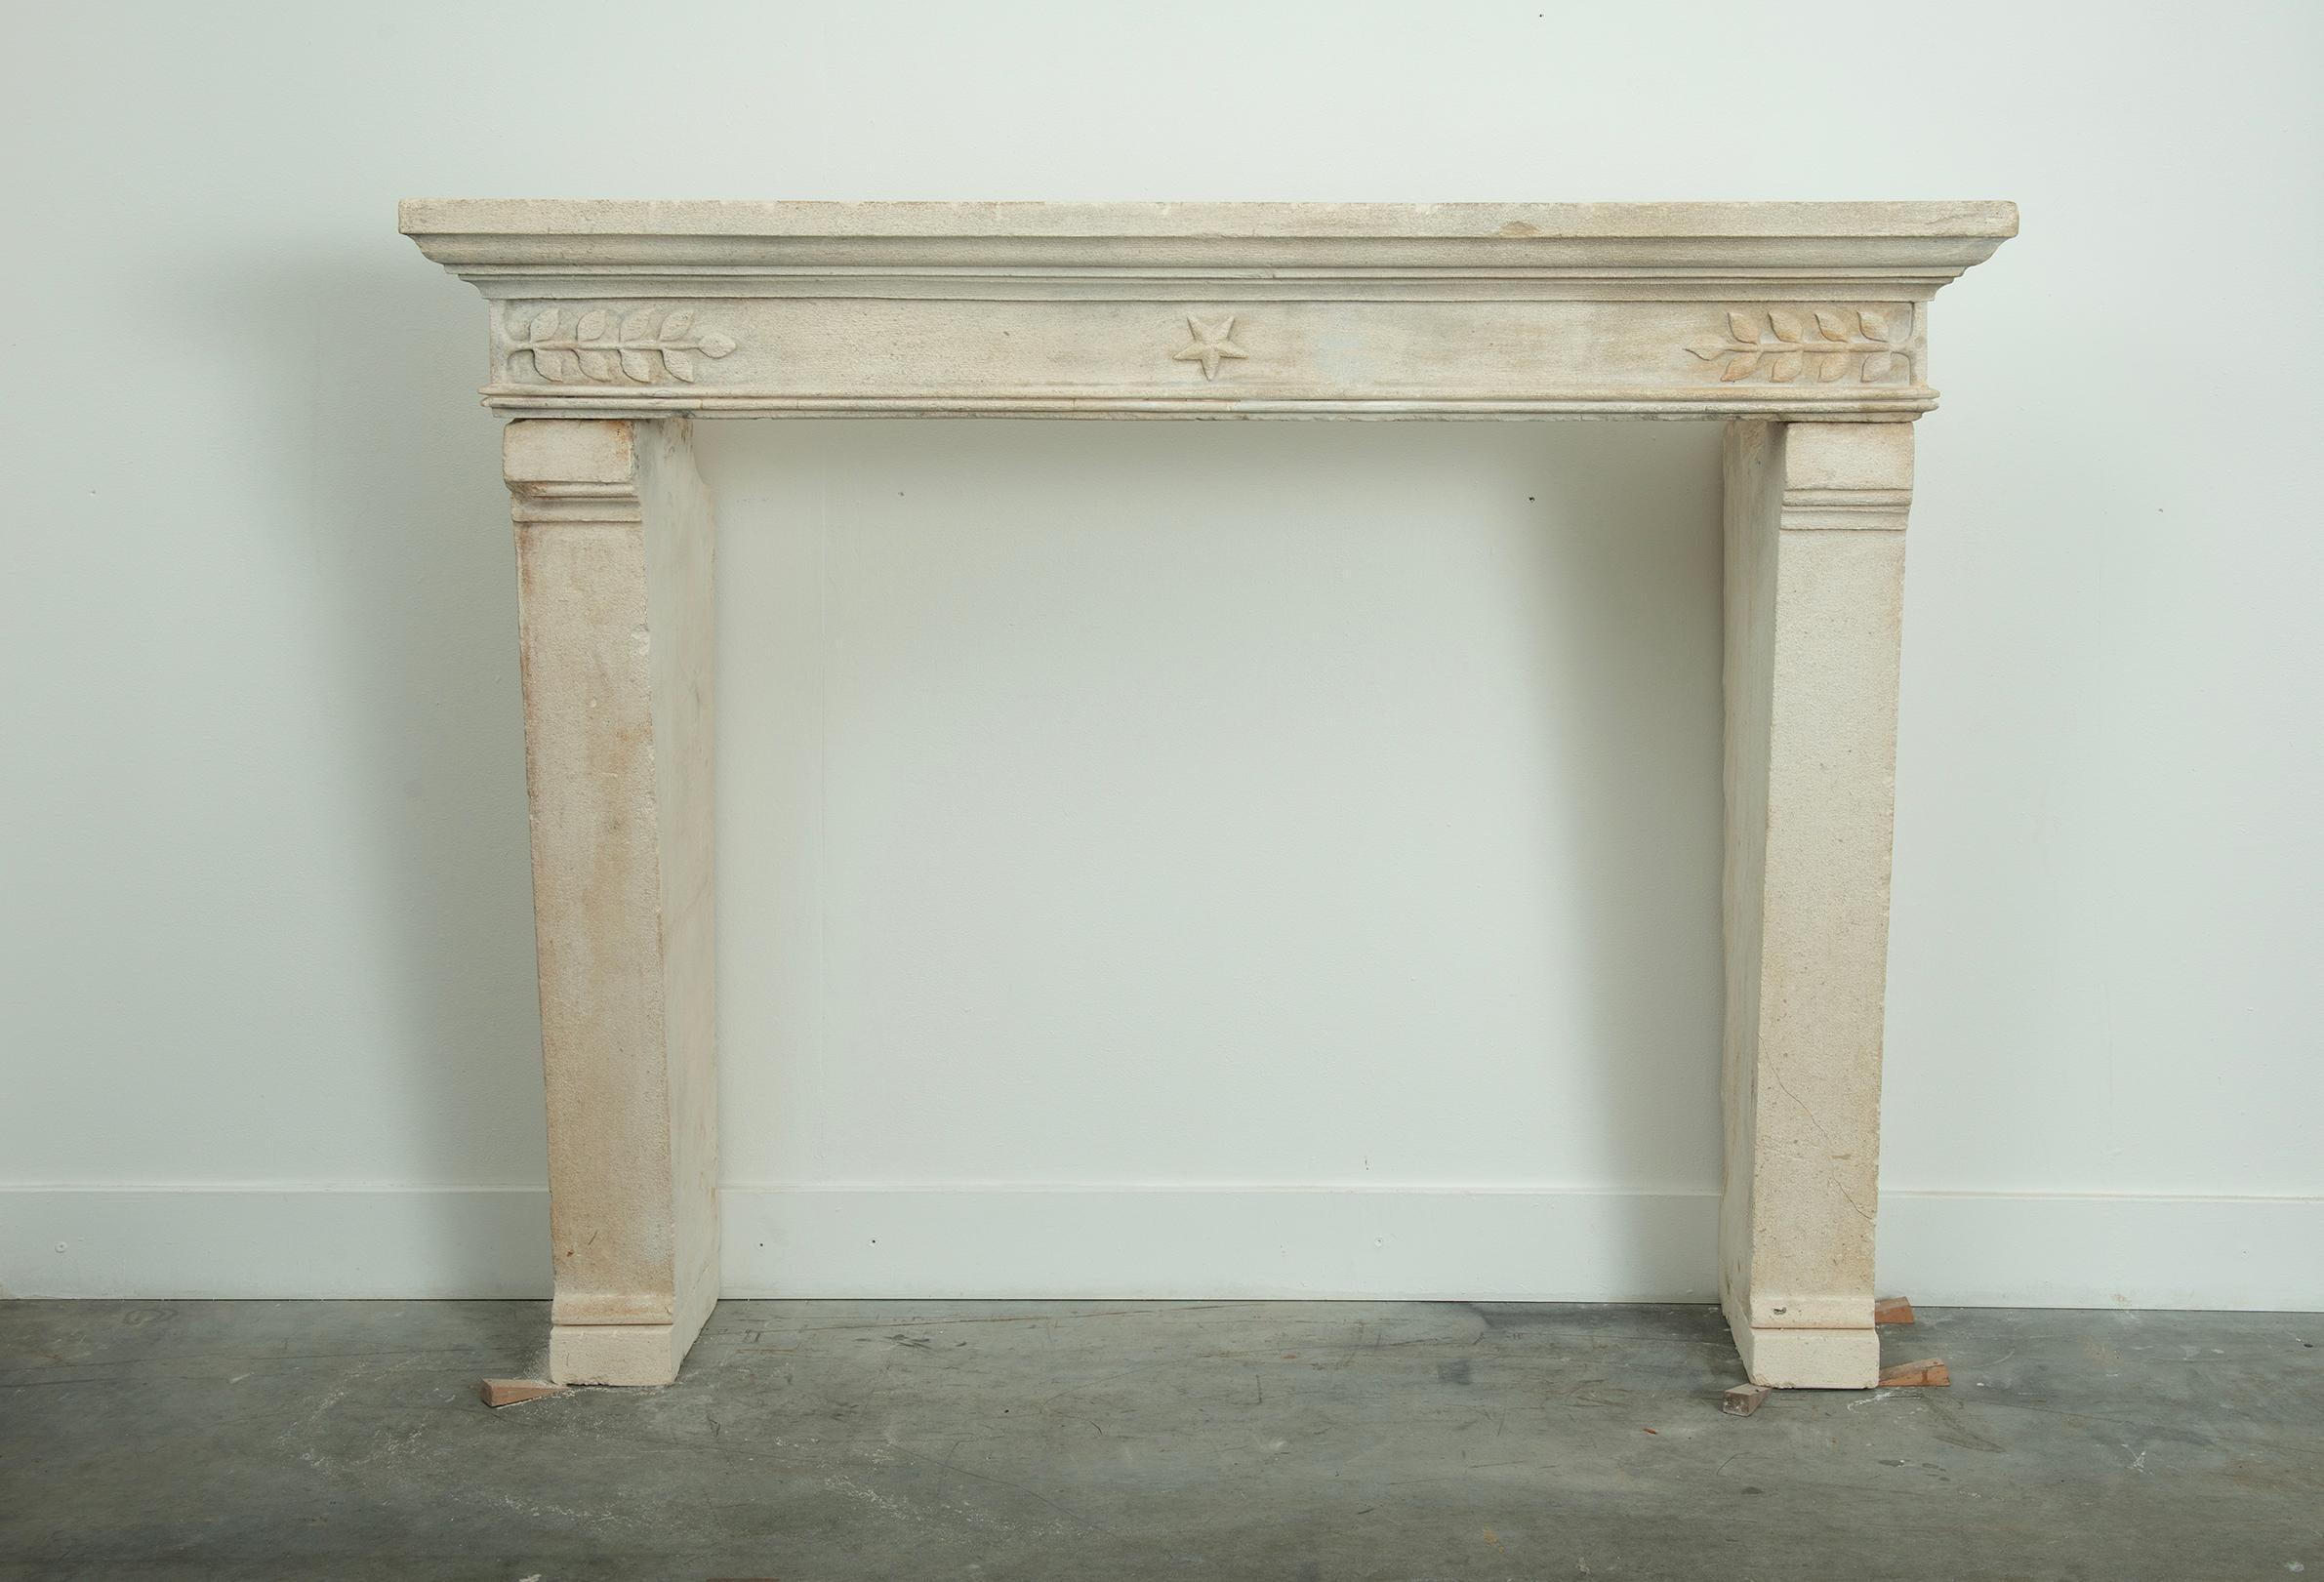 A very nice antique limestone fireplace from France for sale.

The dimensions make this a very versatile and usable piece, its decoration and style capture the mind but also give it enough presence to be appreciated.

The frieze has a nice thick and